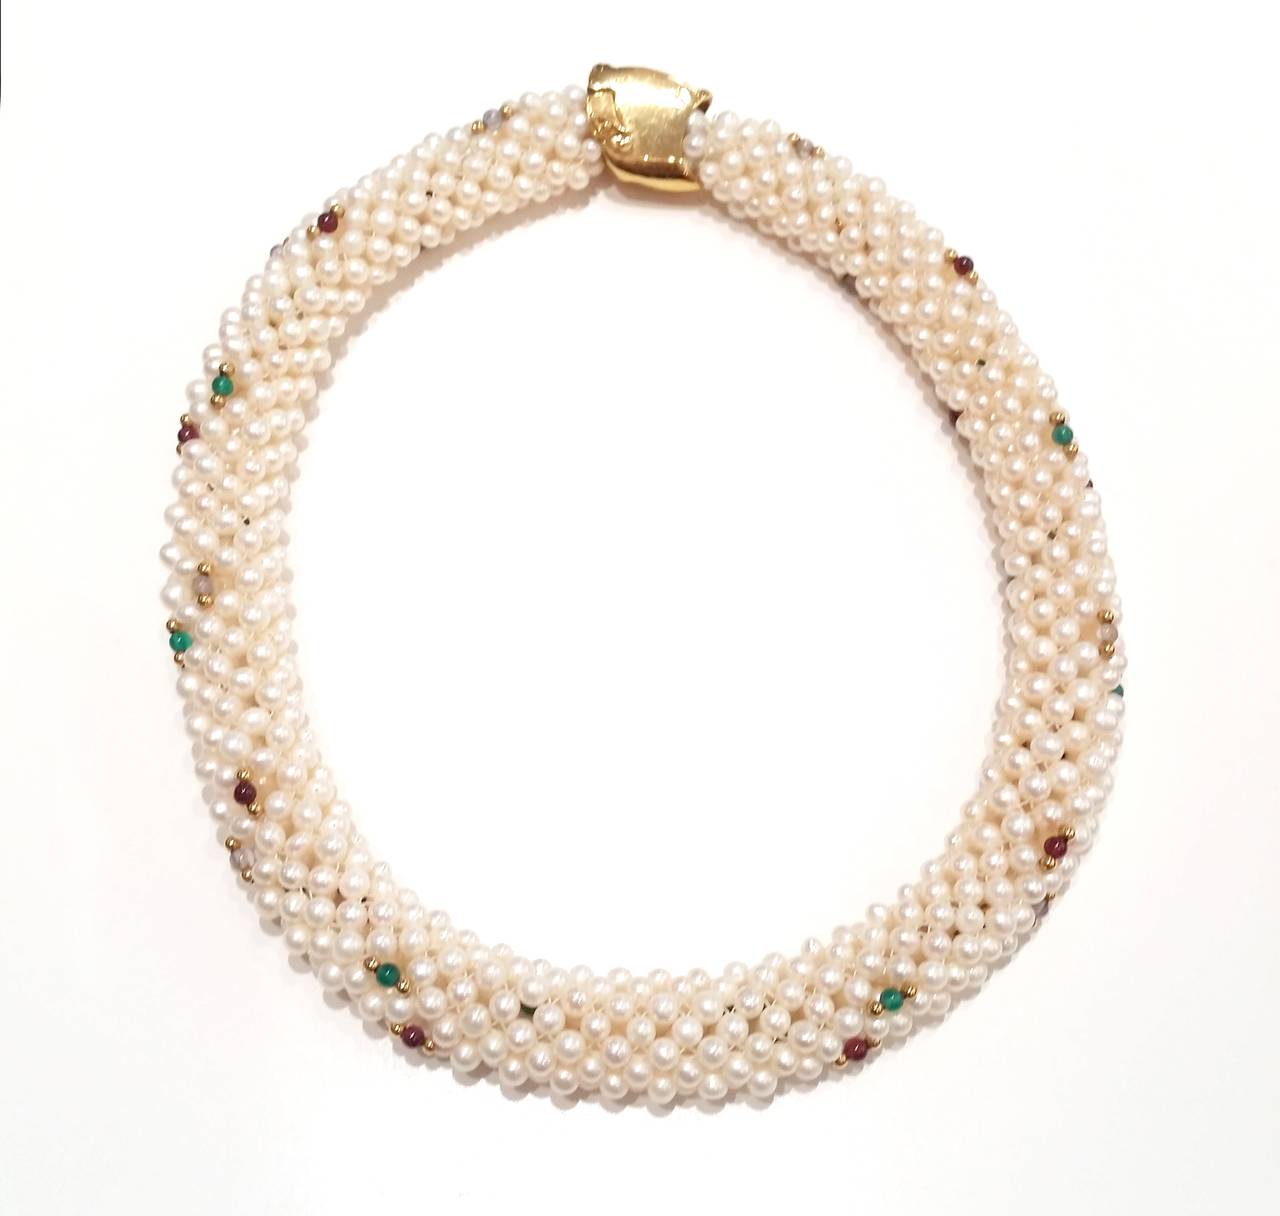 Pearl mesh necklace filled with yellow gold and gem set beads.
Yellow gold clasp